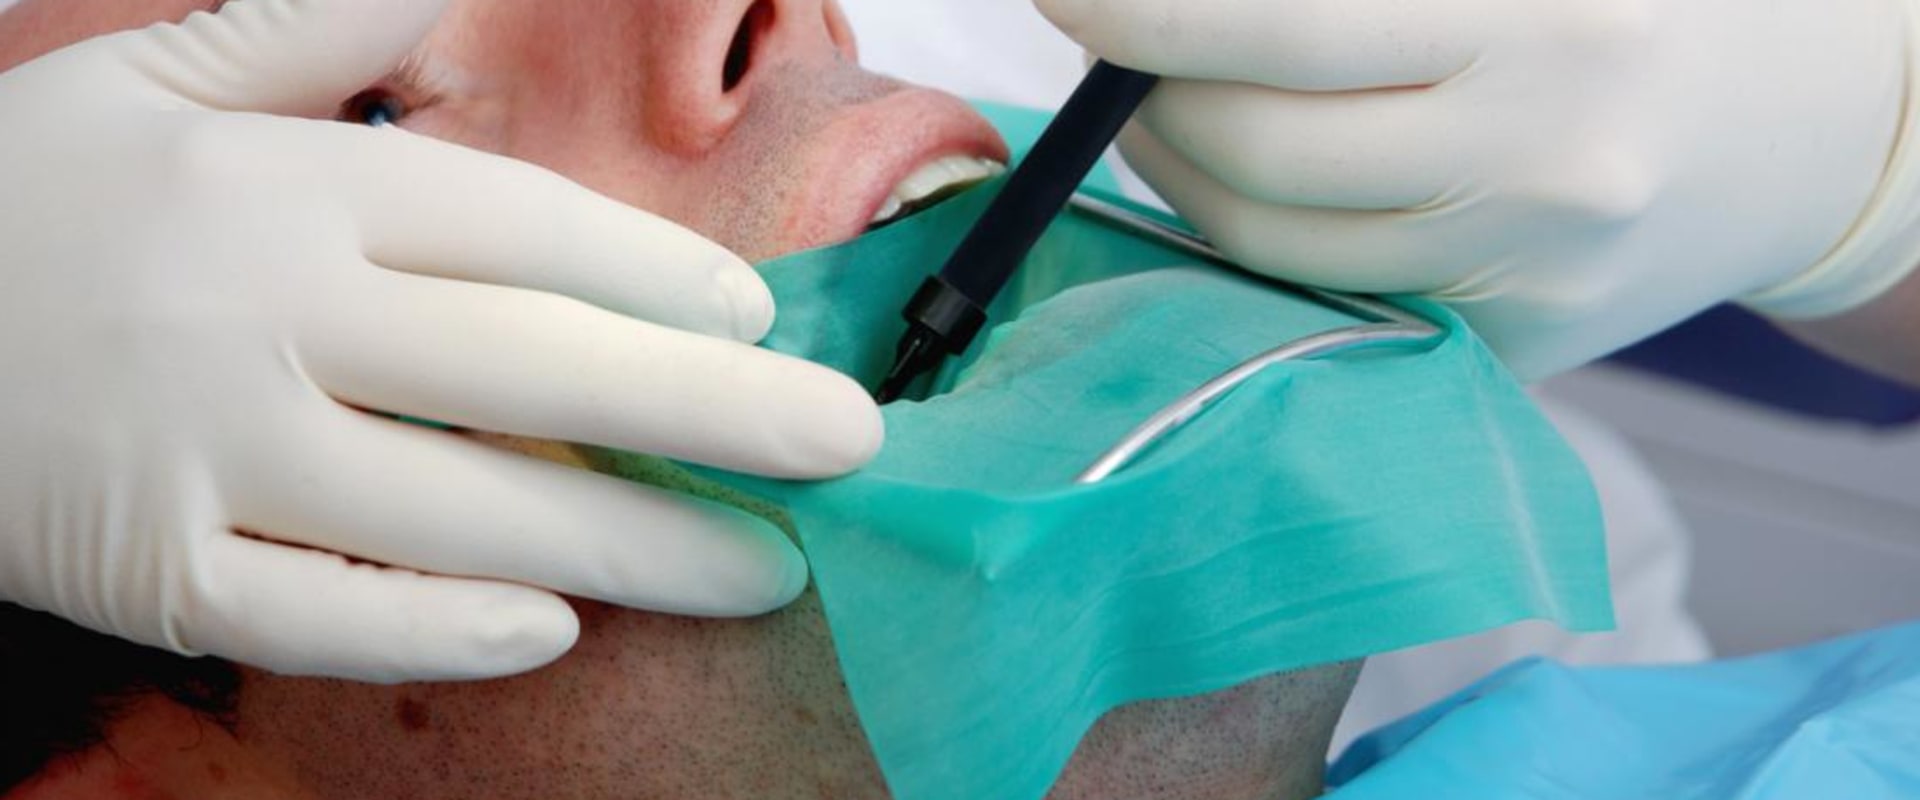 What Procedures Does an Endodontist Perform?